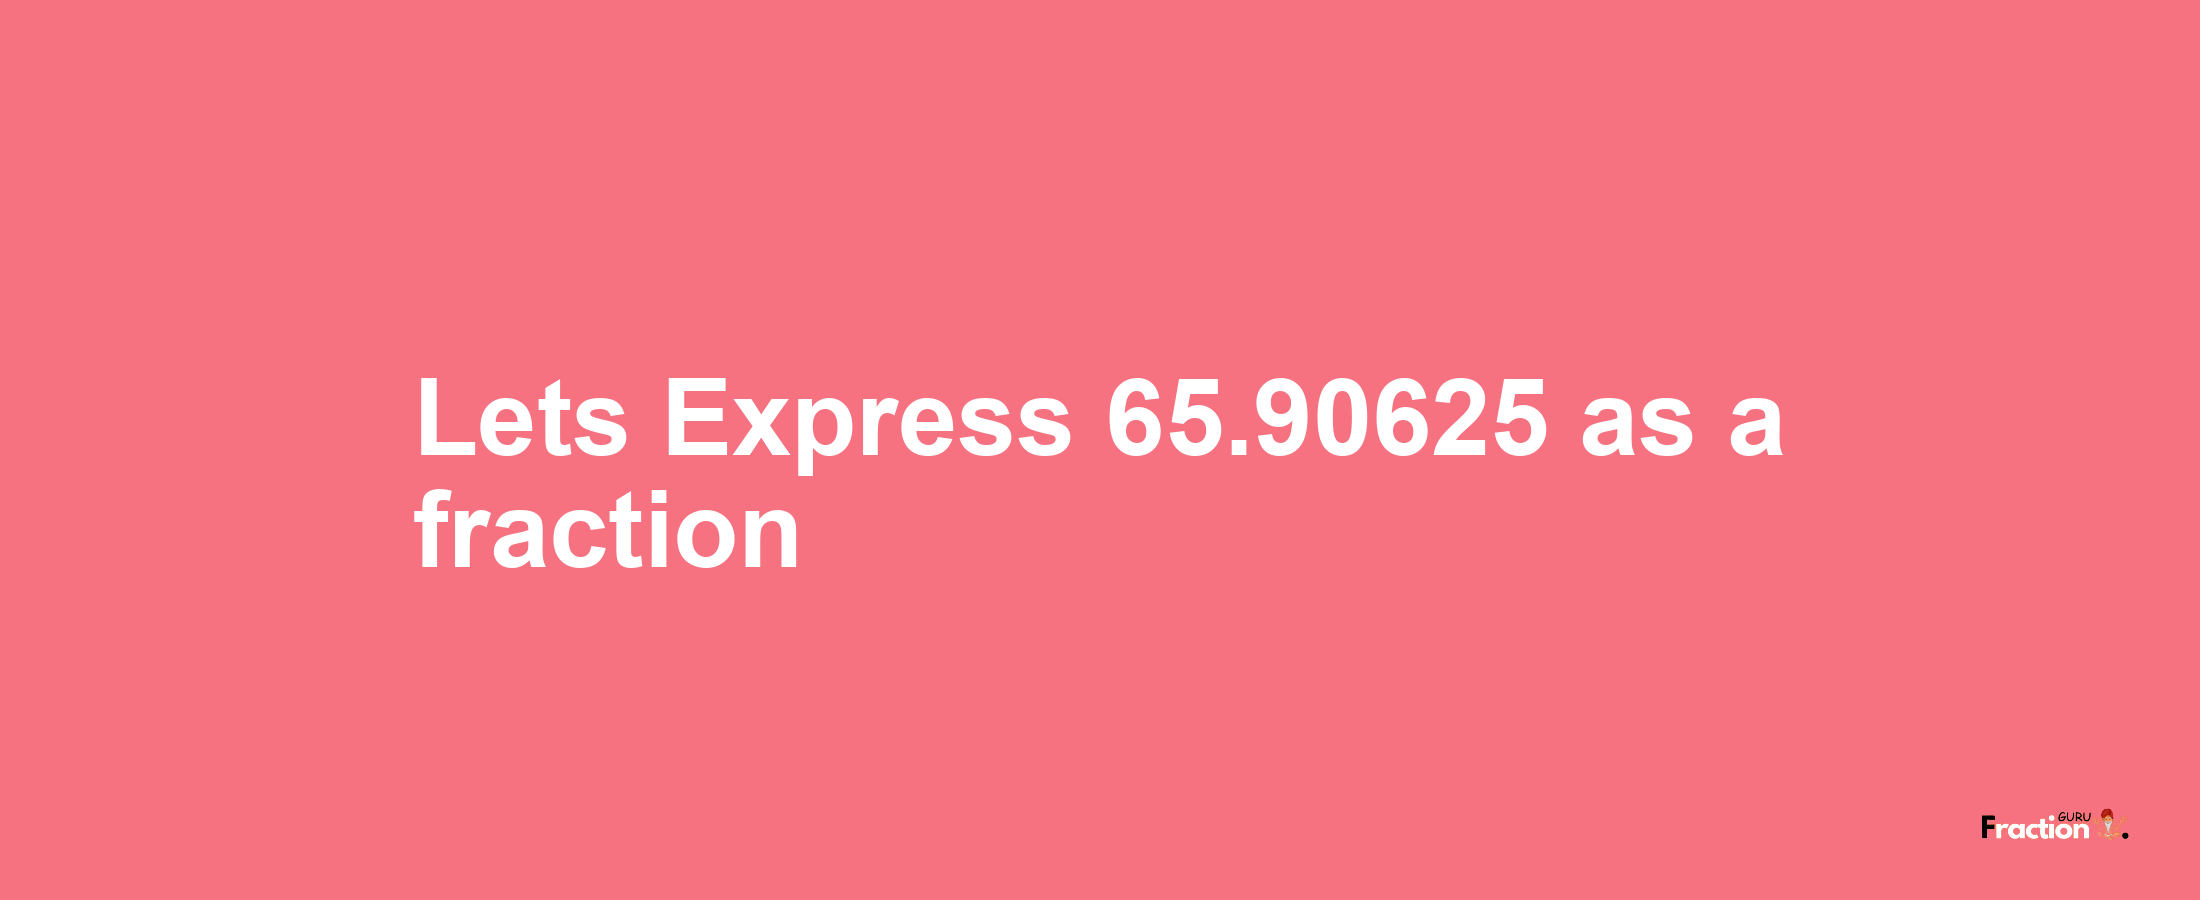 Lets Express 65.90625 as afraction